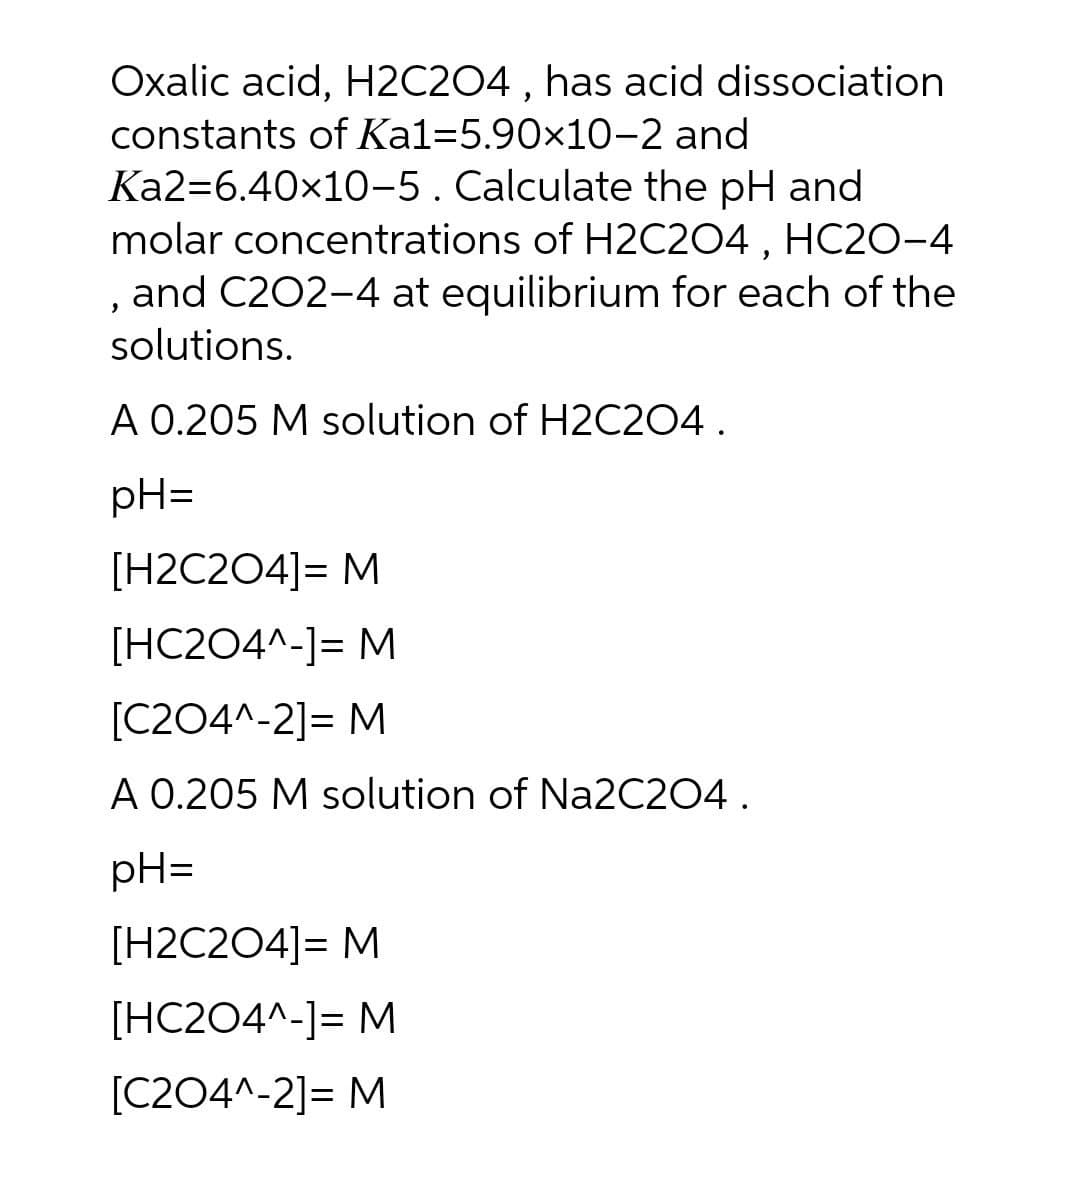 Oxalic acid, H2C204 , has acid dissociation
constants of Ka1=5.90×10-2 and
Ka2=6.40x10-5.Calculate the pH and
molar concentrations of H2C204 , HC20-4
and C202-4 at equilibrium for each of the
solutions.
A 0.205 M solution of H2C204.
pH=
[H2C204]= M
[HC204^-]= M
[C204^-2]= M
A 0.205 M solution of Na2C204.
pH=
[H2C2O4]= M
[HC204^-]= M
[C204^-2]= M
